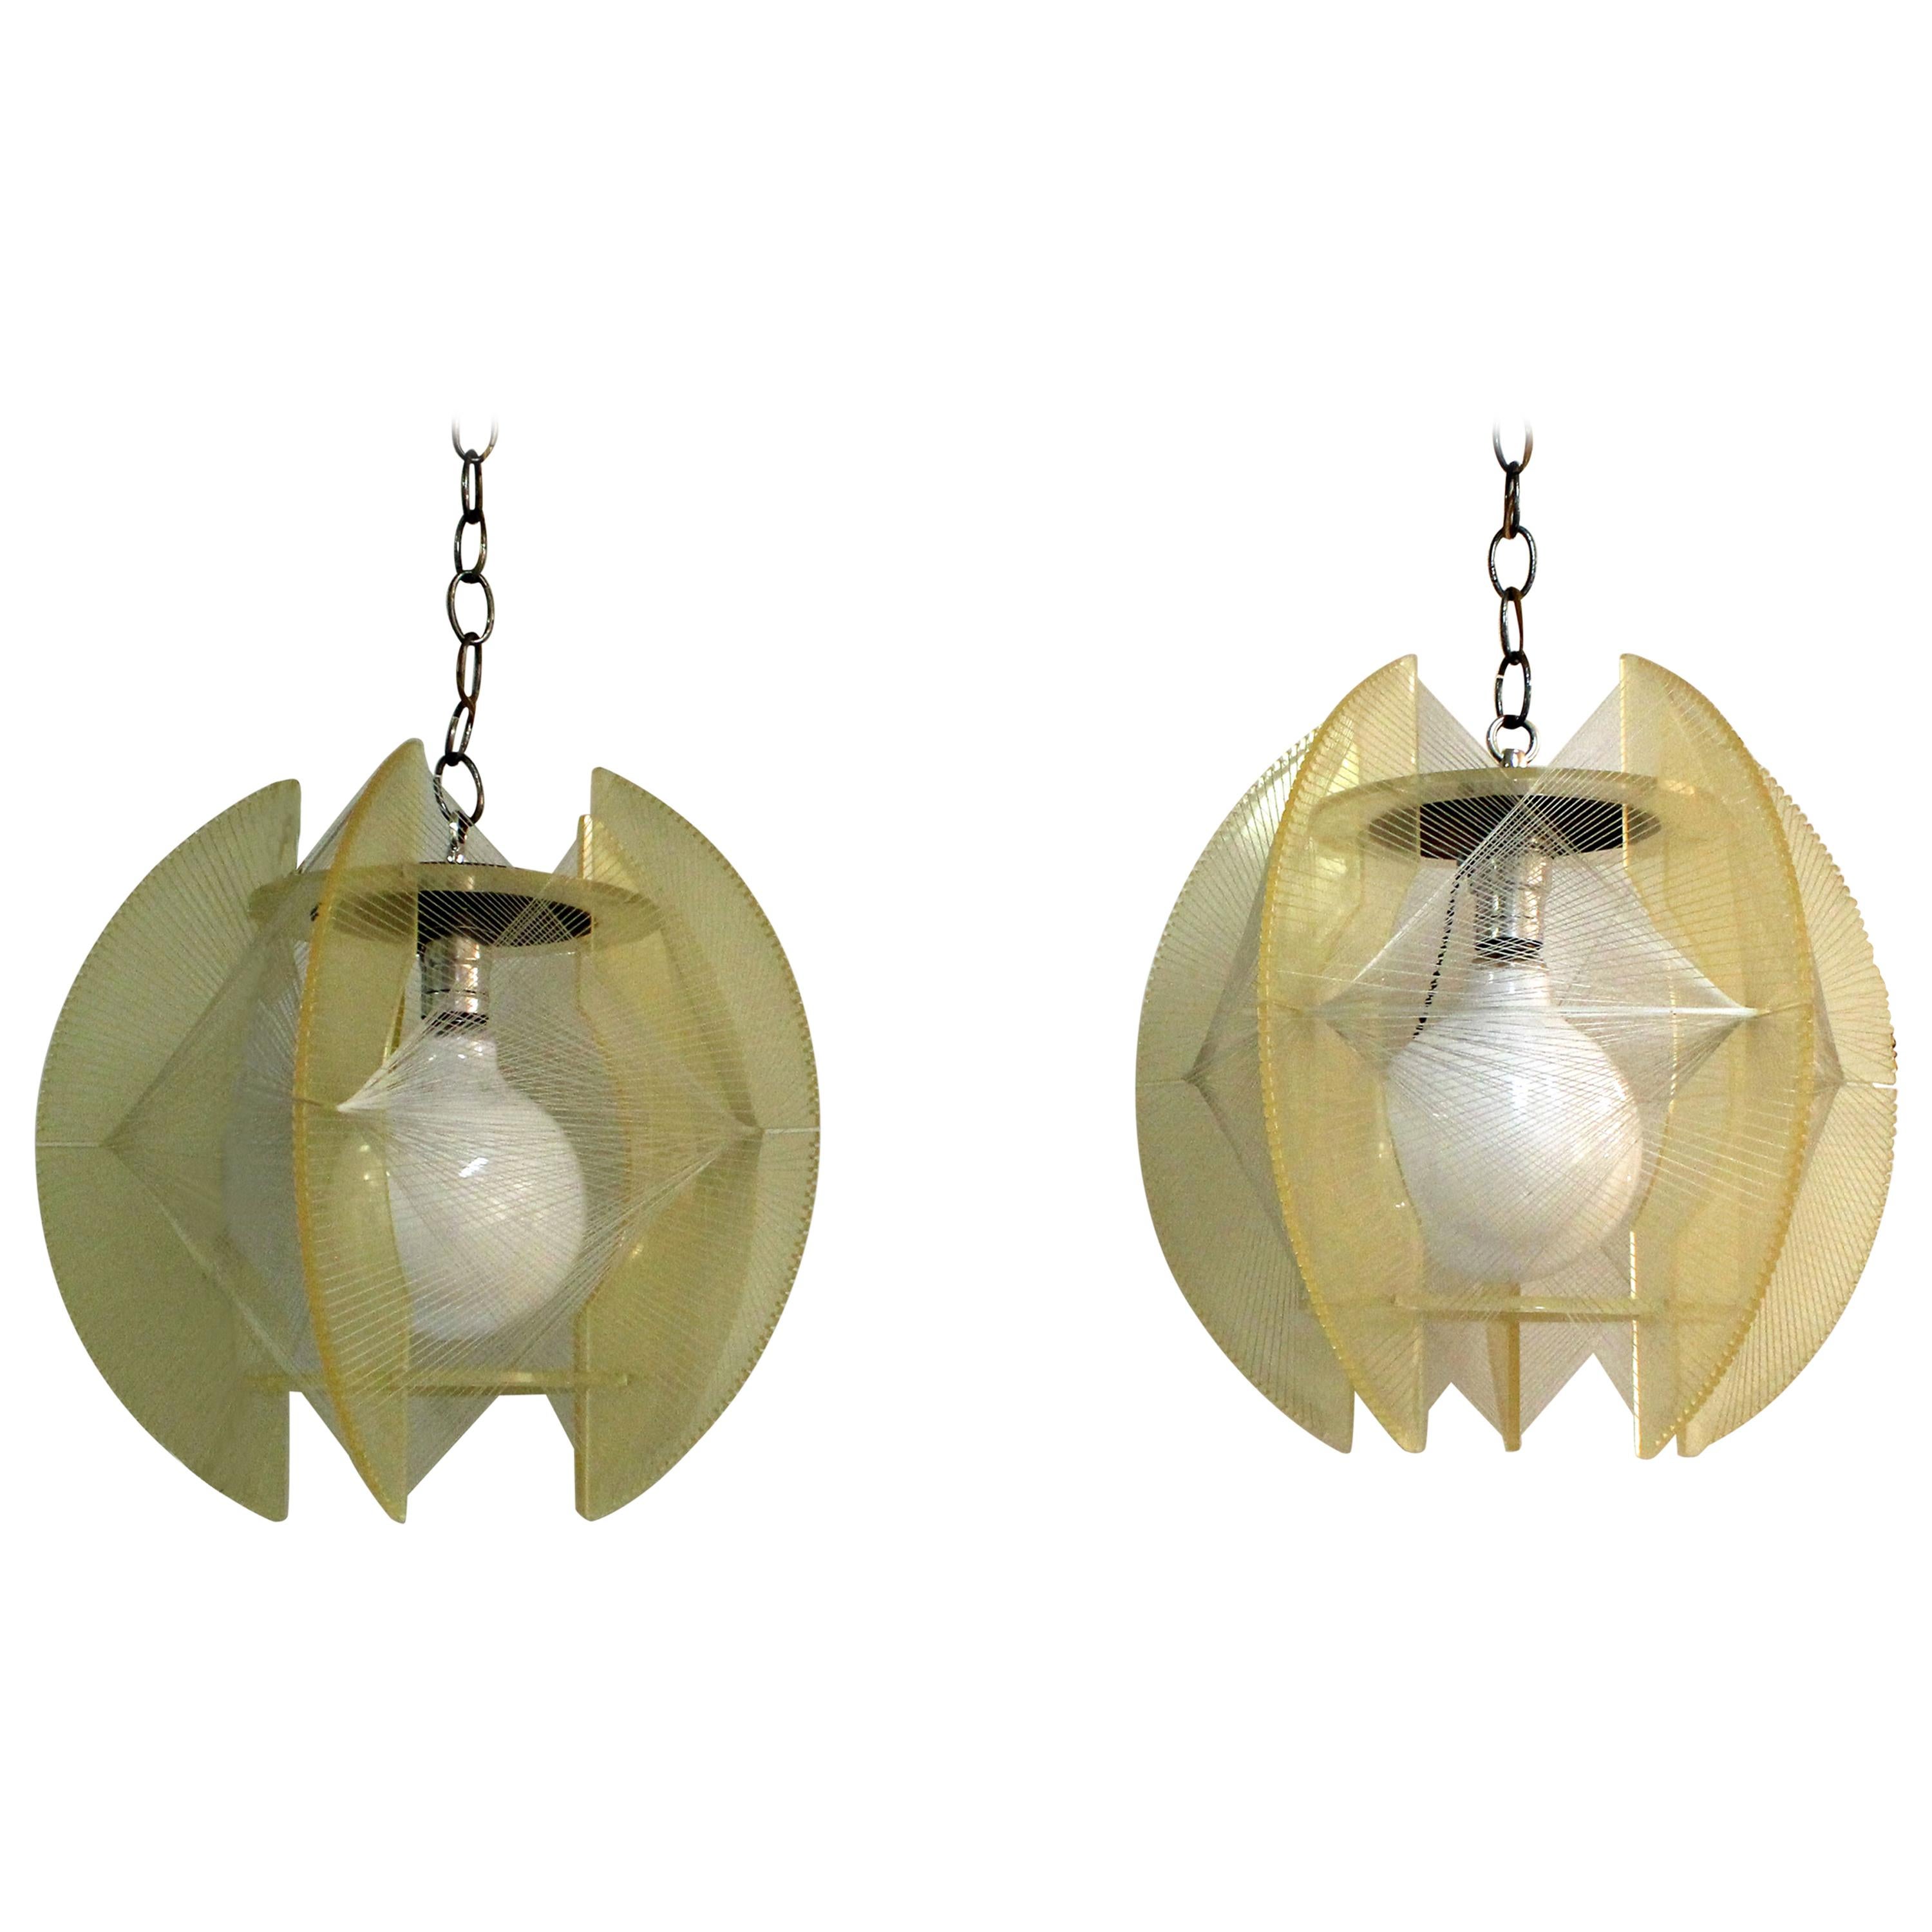 Offered is a retro pair of Mid-Century Modern pendant lights. These hanging lamps are made with Lucite and nylon string. They are in good, working condition, showing slight wear from age. They are not signed.

Dimensions:
14